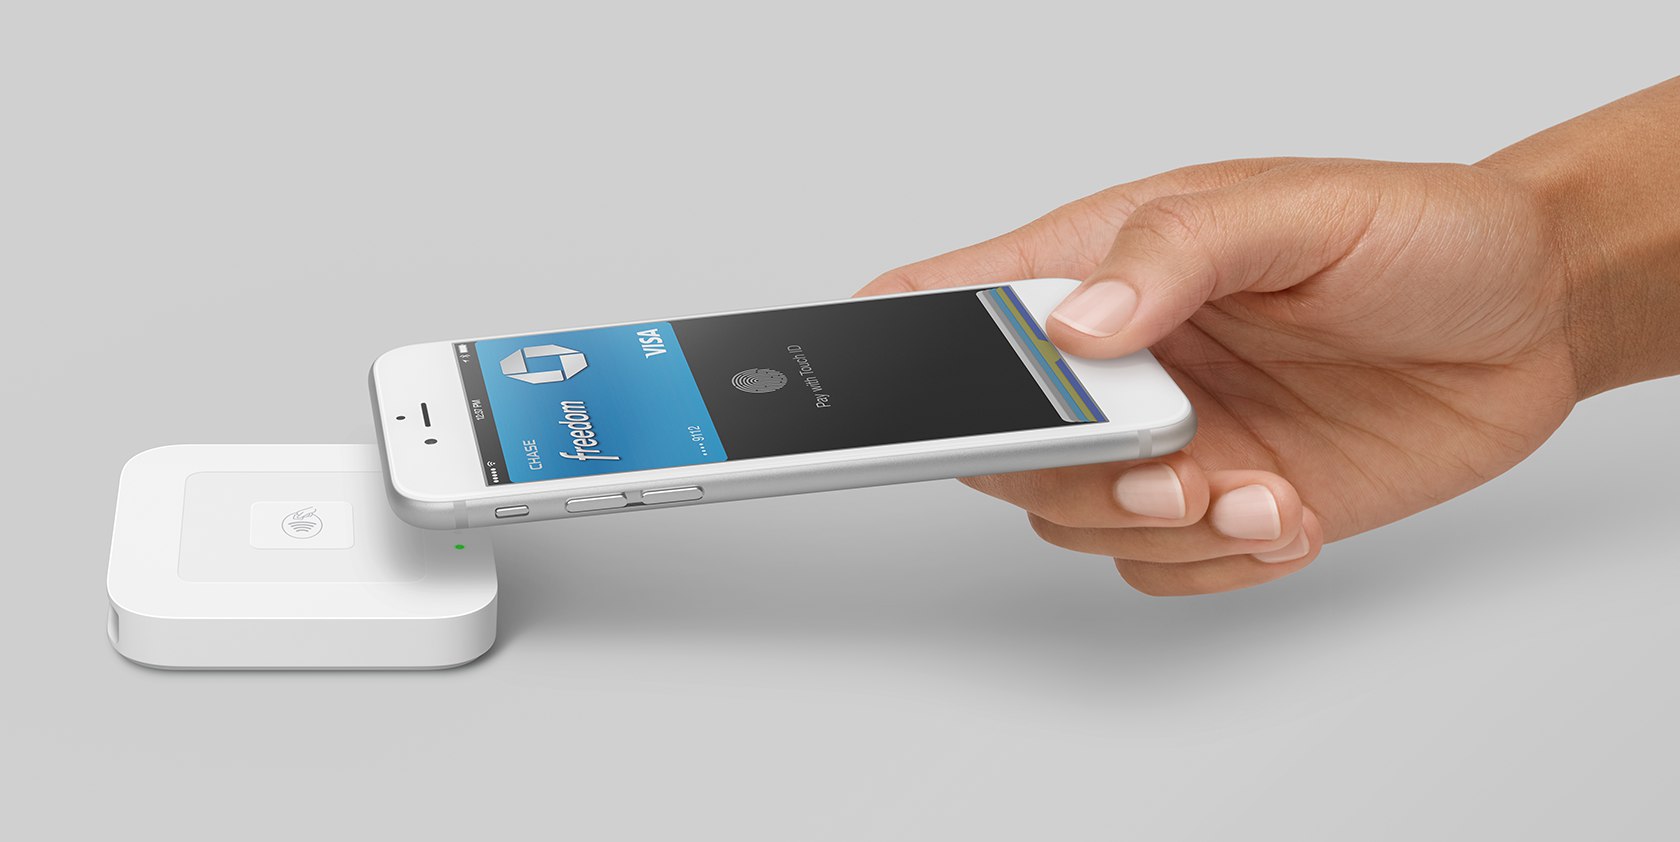 Image of hand holding iPhone paying with Apple Pay near Square contactless and chip reader